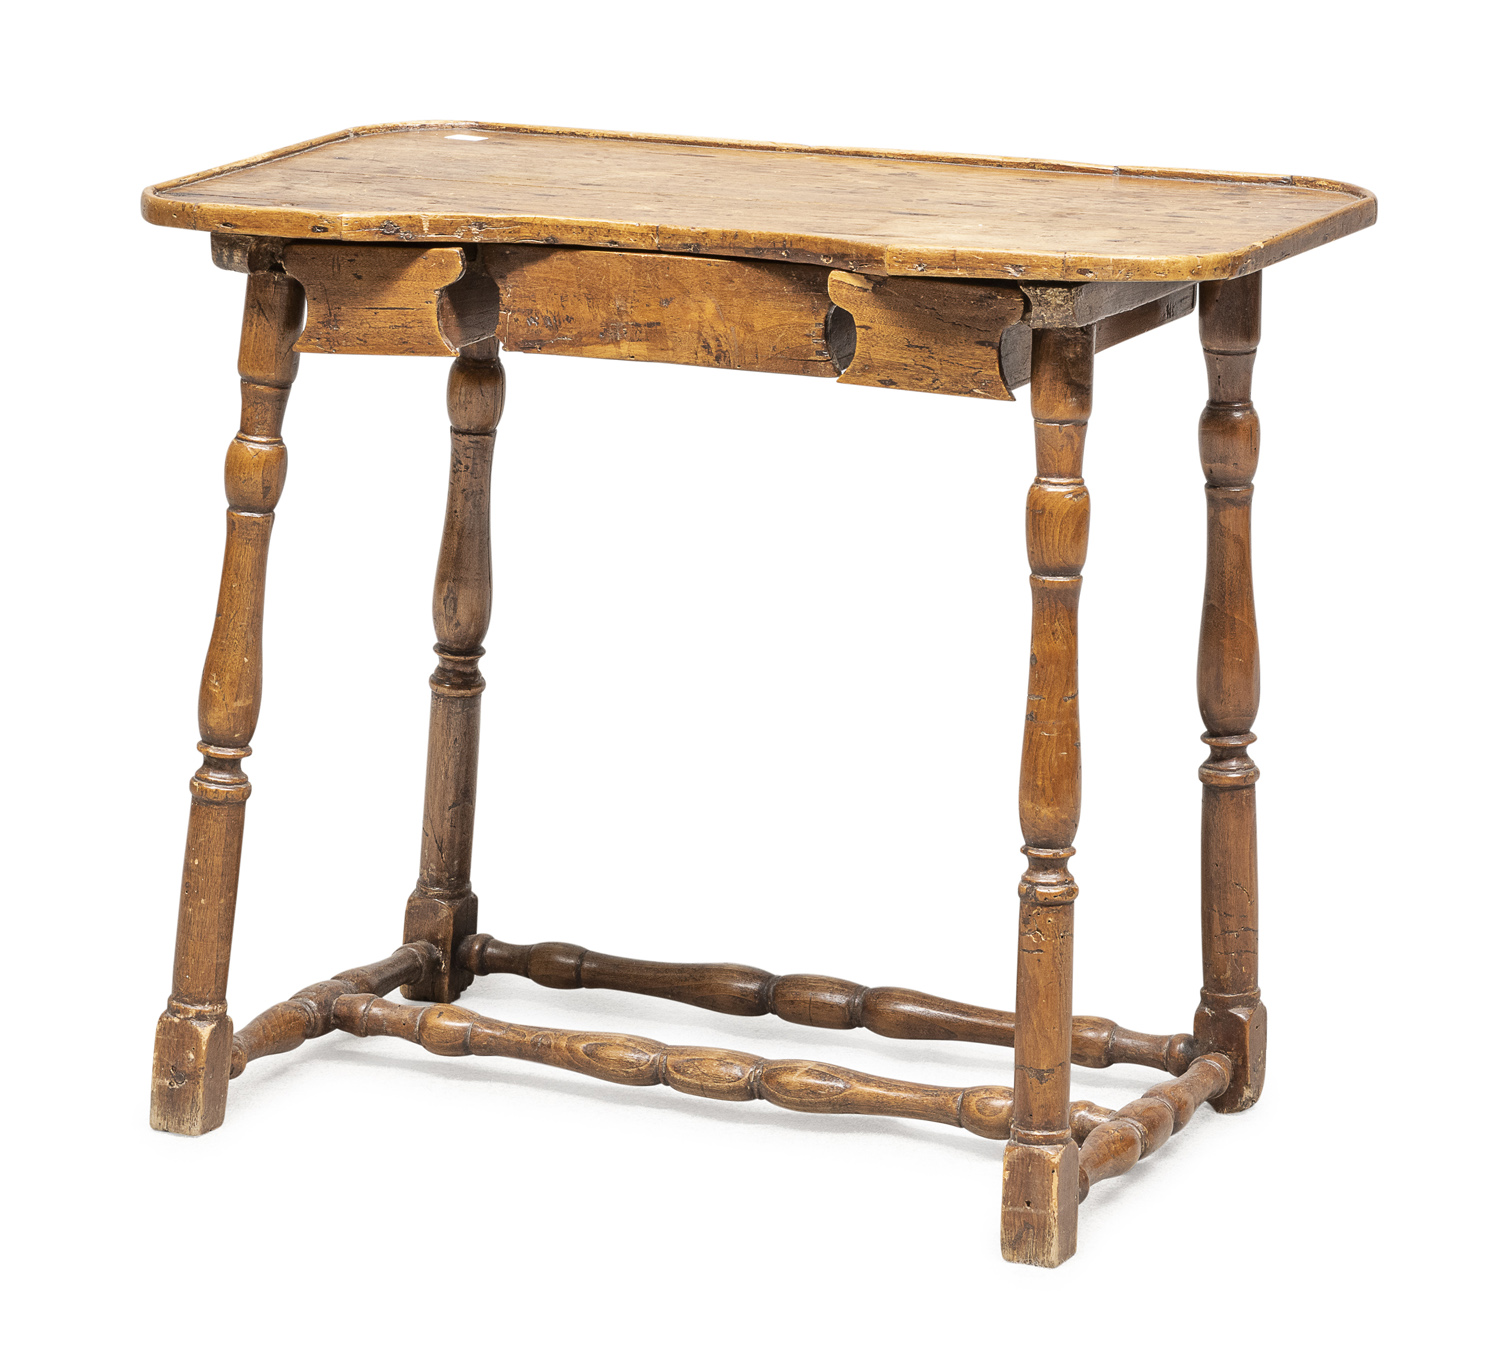 SMALL WORK TABLE EARLY 19th CENTURY